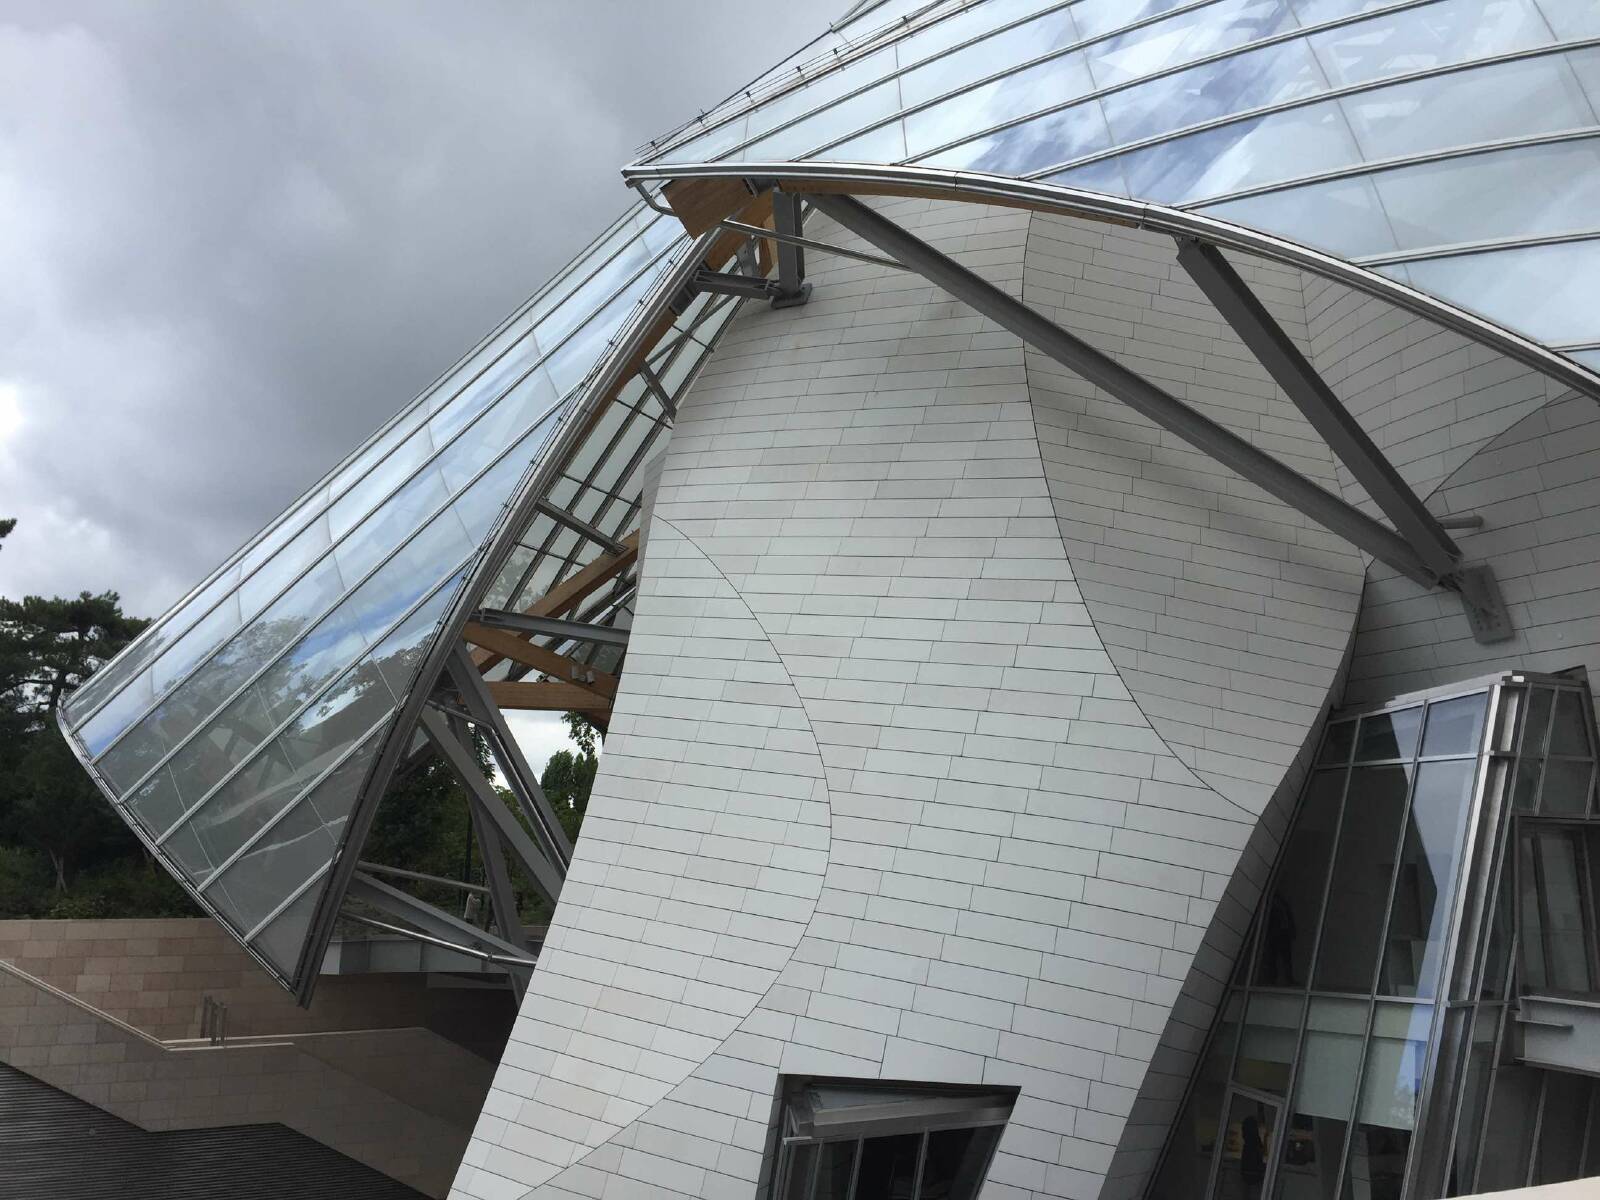 Fondation Louis Vuitton - Compare Ticket Prices Different Websites to Find the Best Deal